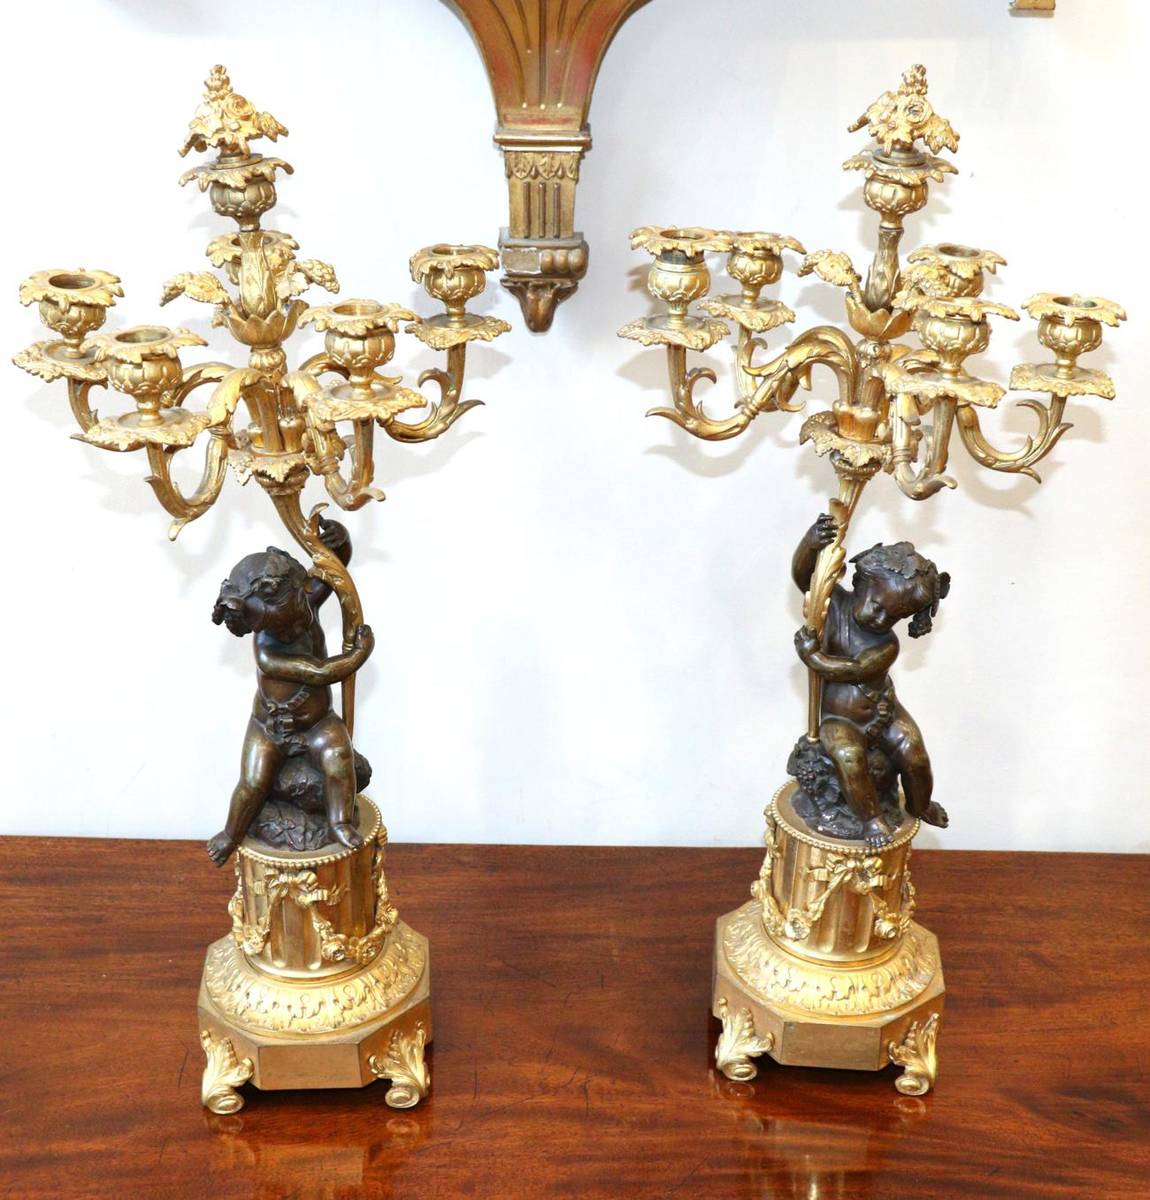 Lot 267 - A Pair of French Gilt and Patinated Bronze Six-Light Candelabra, 19th century, with foliate finials